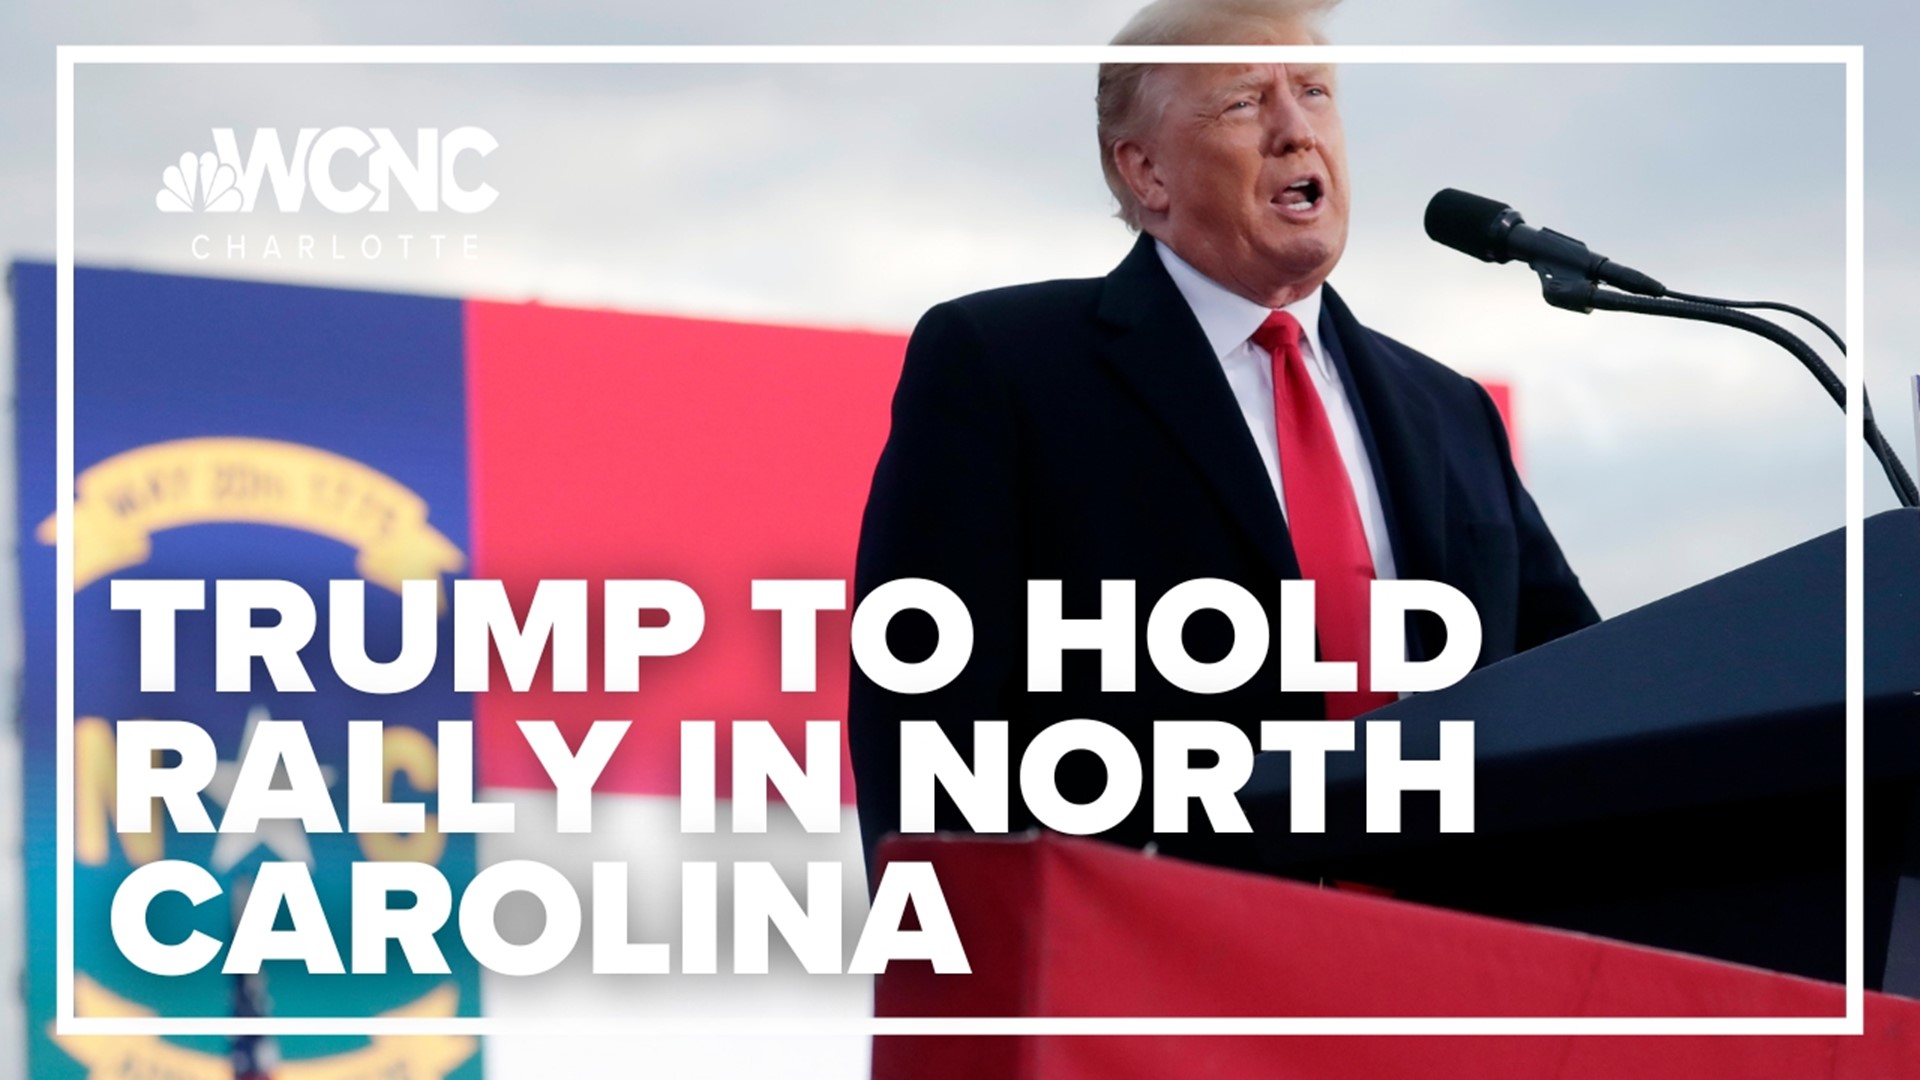 Former President Trump will be in North Carolina to hold a rally.